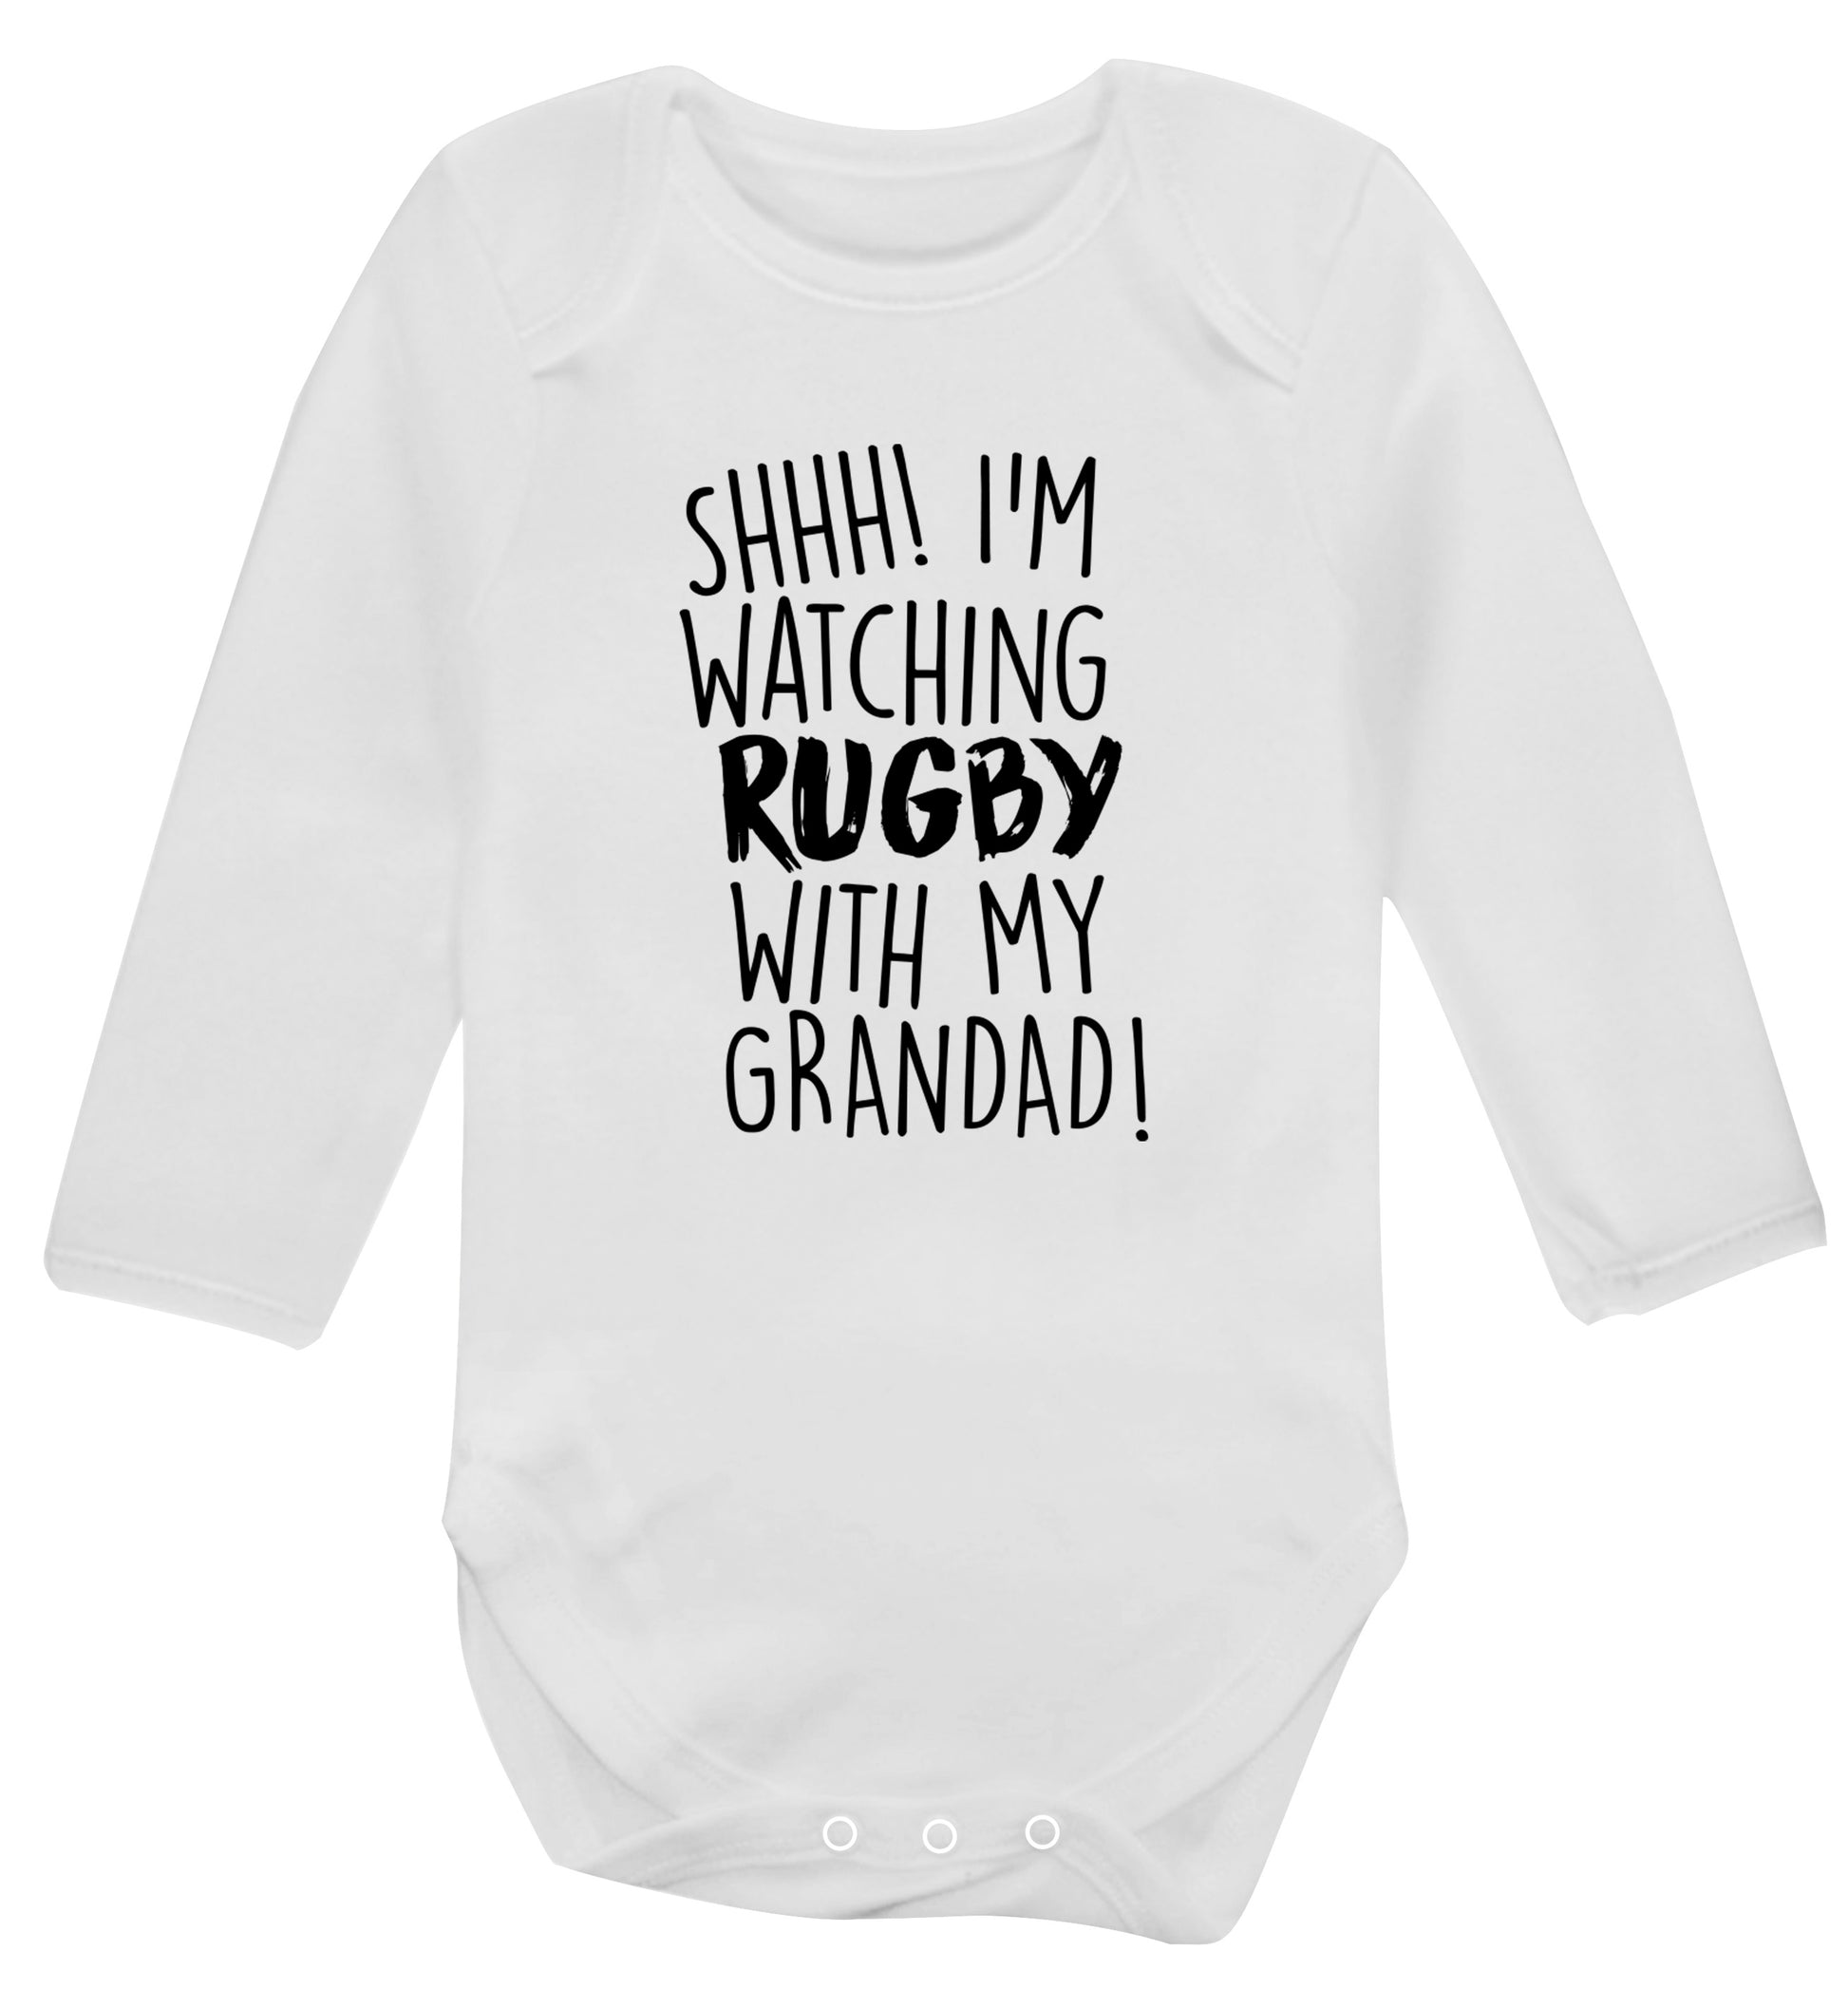 Shh I'm watching rugby with my grandaughter Baby Vest long sleeved white 6-12 months